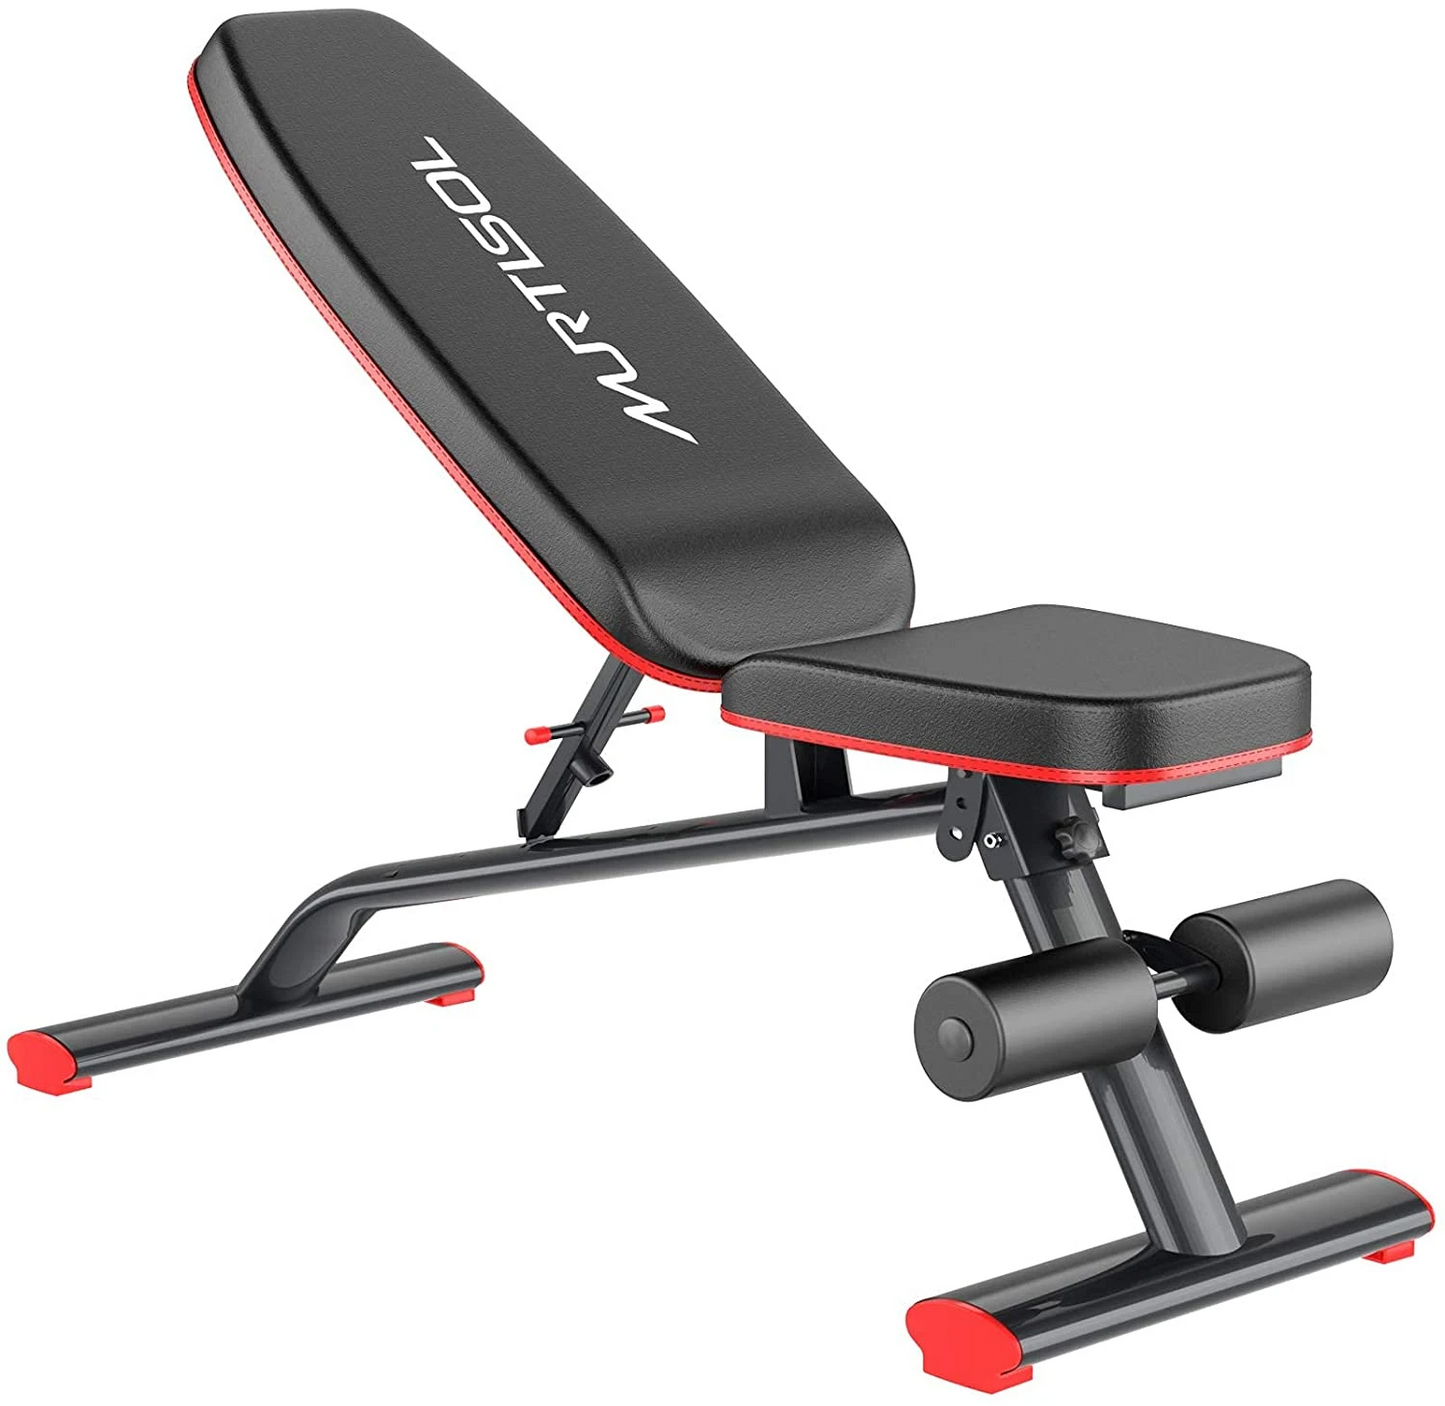 Adjustable Weight Bench Training Bench for Full Body Work Out